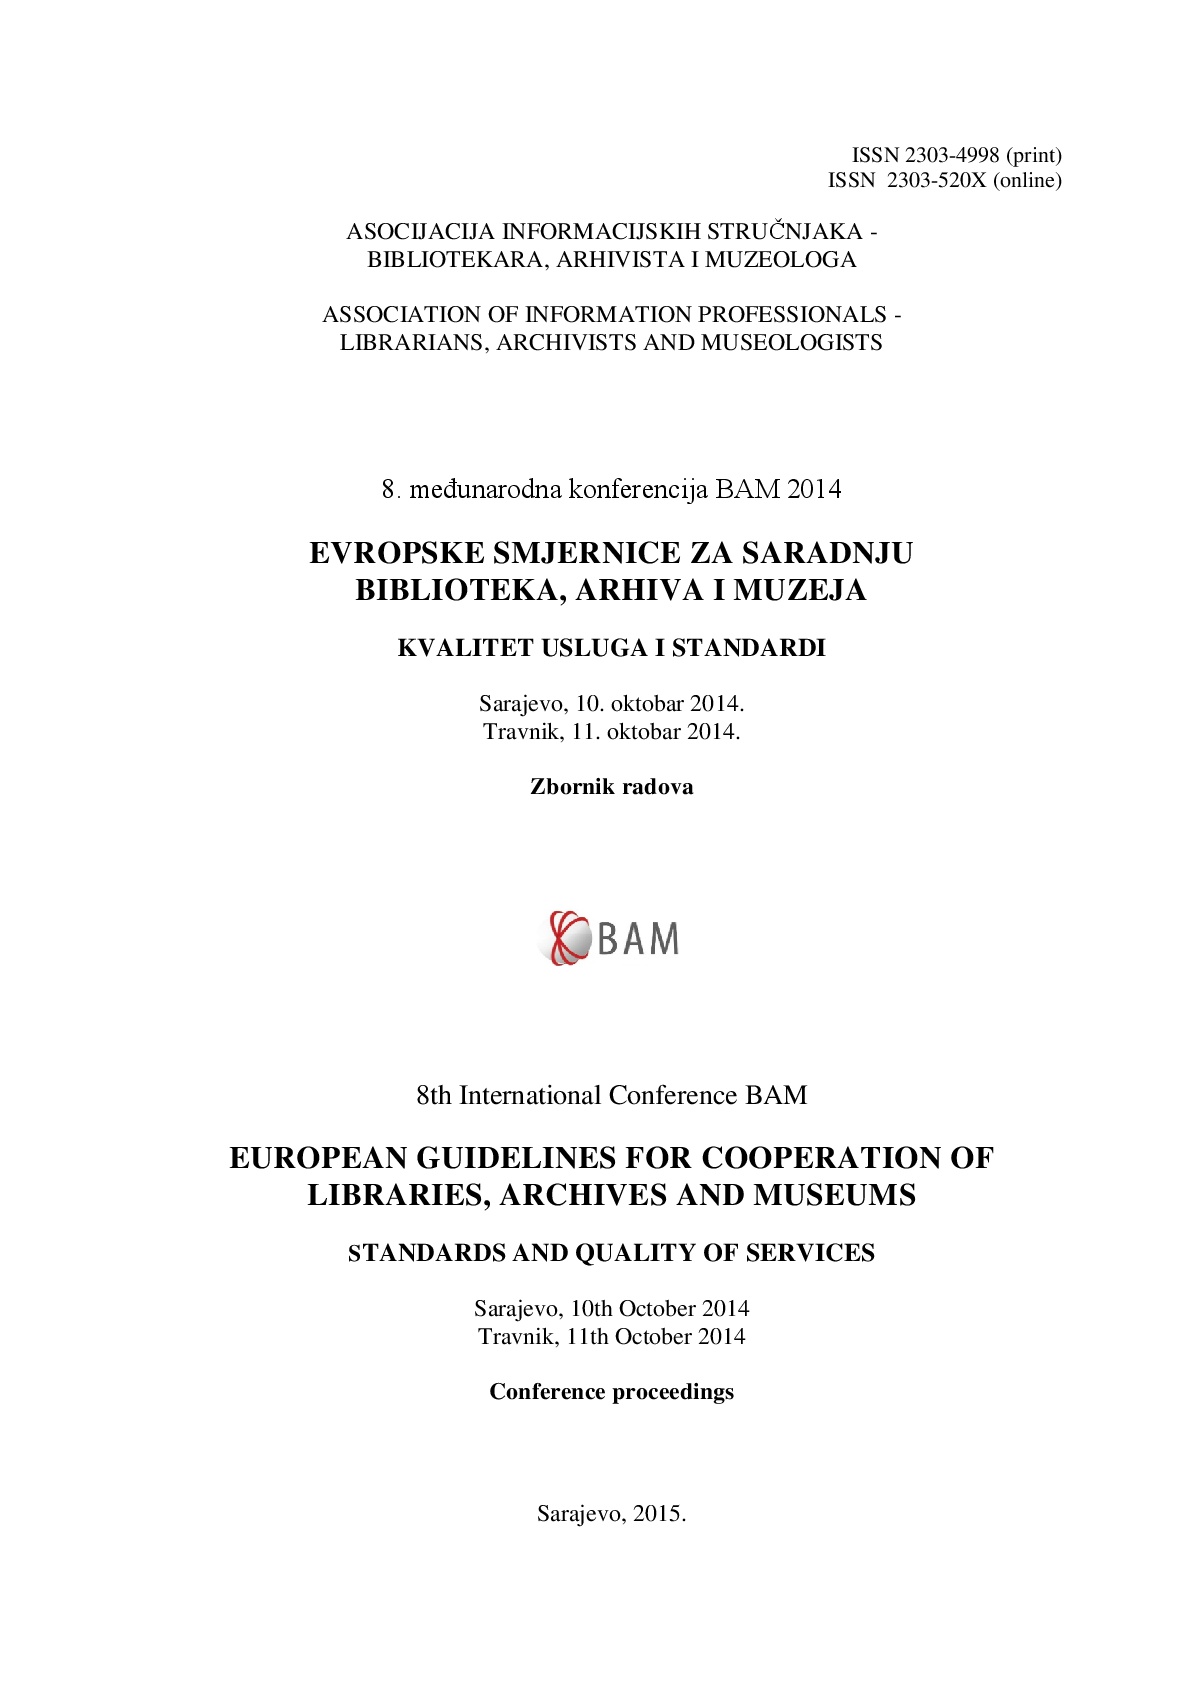 Achieving Quality and Impact for Europe’s Library Collections